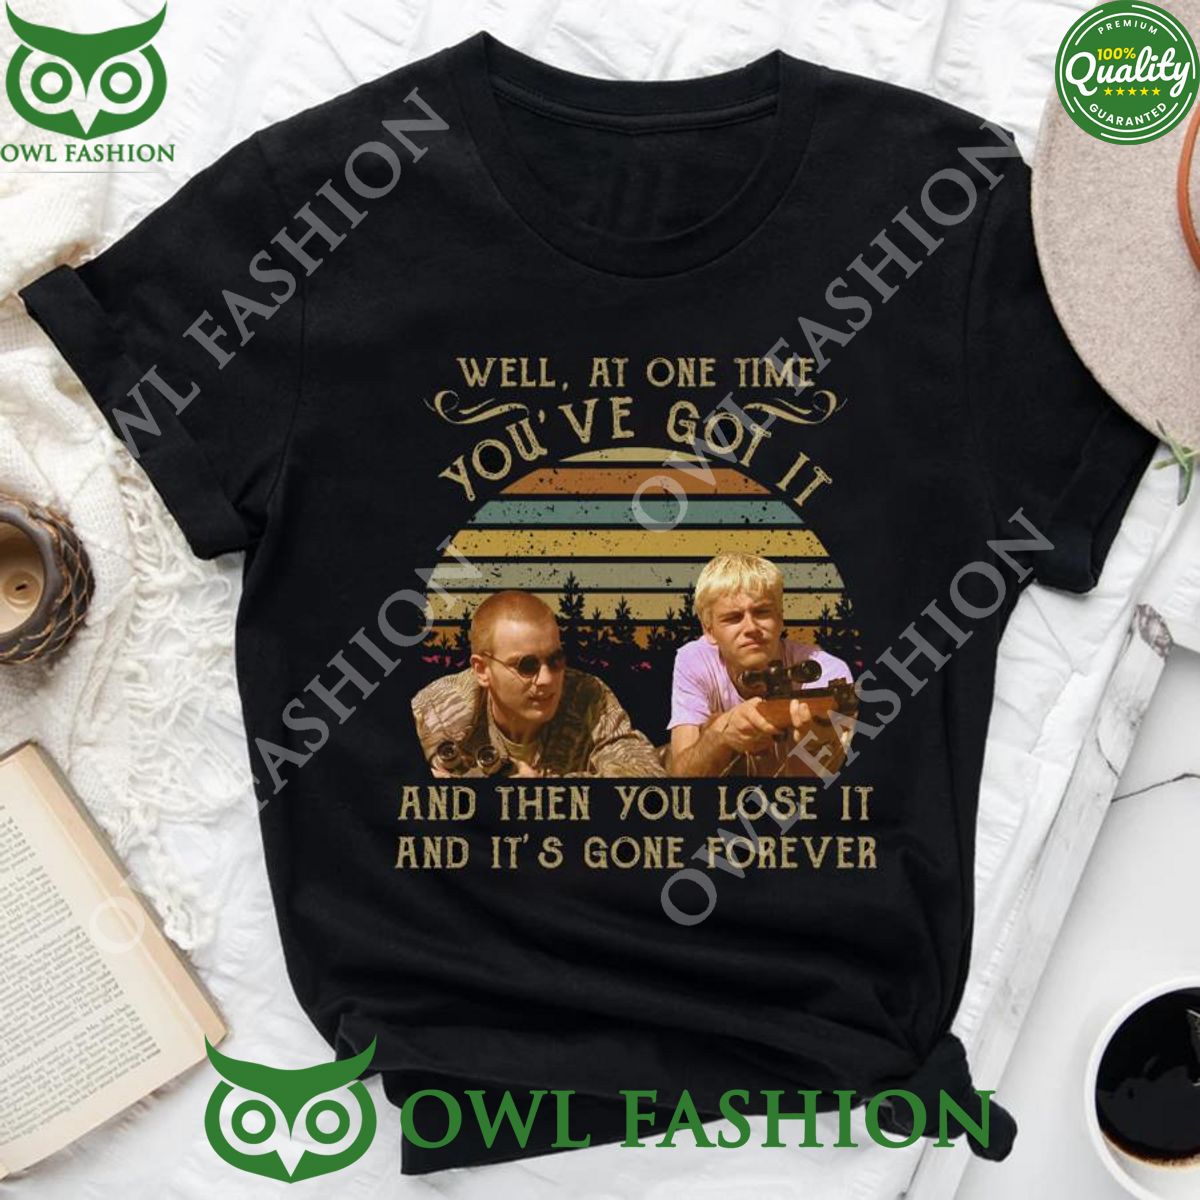 Fix Sick Boy Trainspotting at one time you got it lose it gove forever vintage movie t-shirt